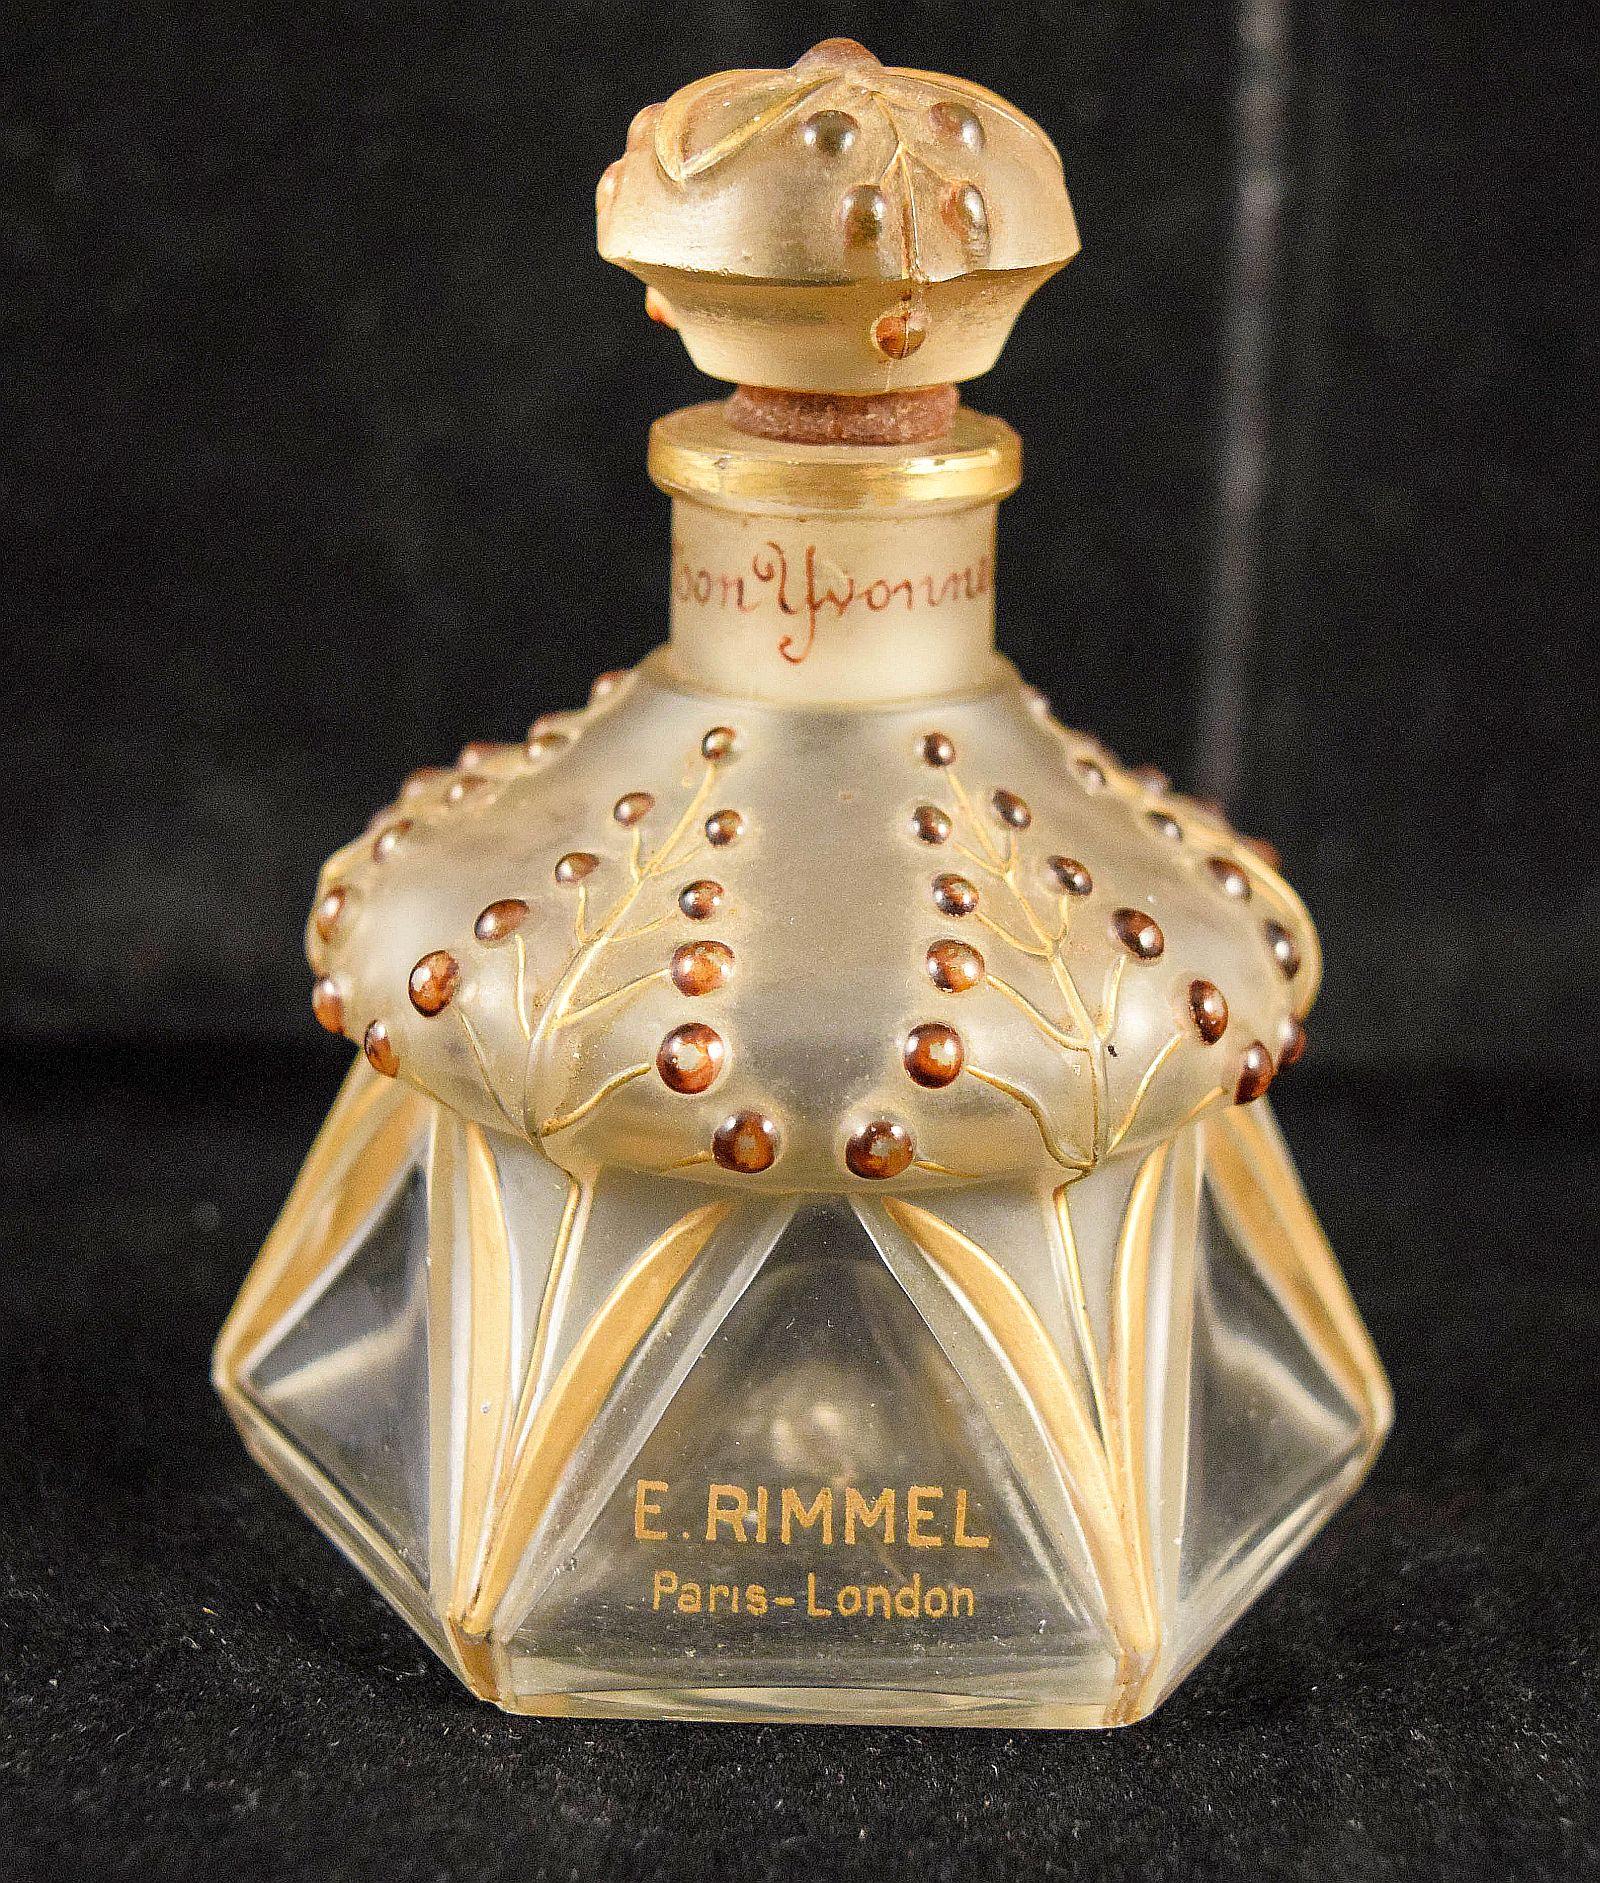 JULIEN VIARD PERFUME BOTTLLE FOR RIMMEL
An YVONETTE glass perfume bottle circa.1924 hexagonal section relief moulded and gilded with stylized g.
This is a very rare example I haven't seen one in auction catalogs
in the last twenty years.
It is in